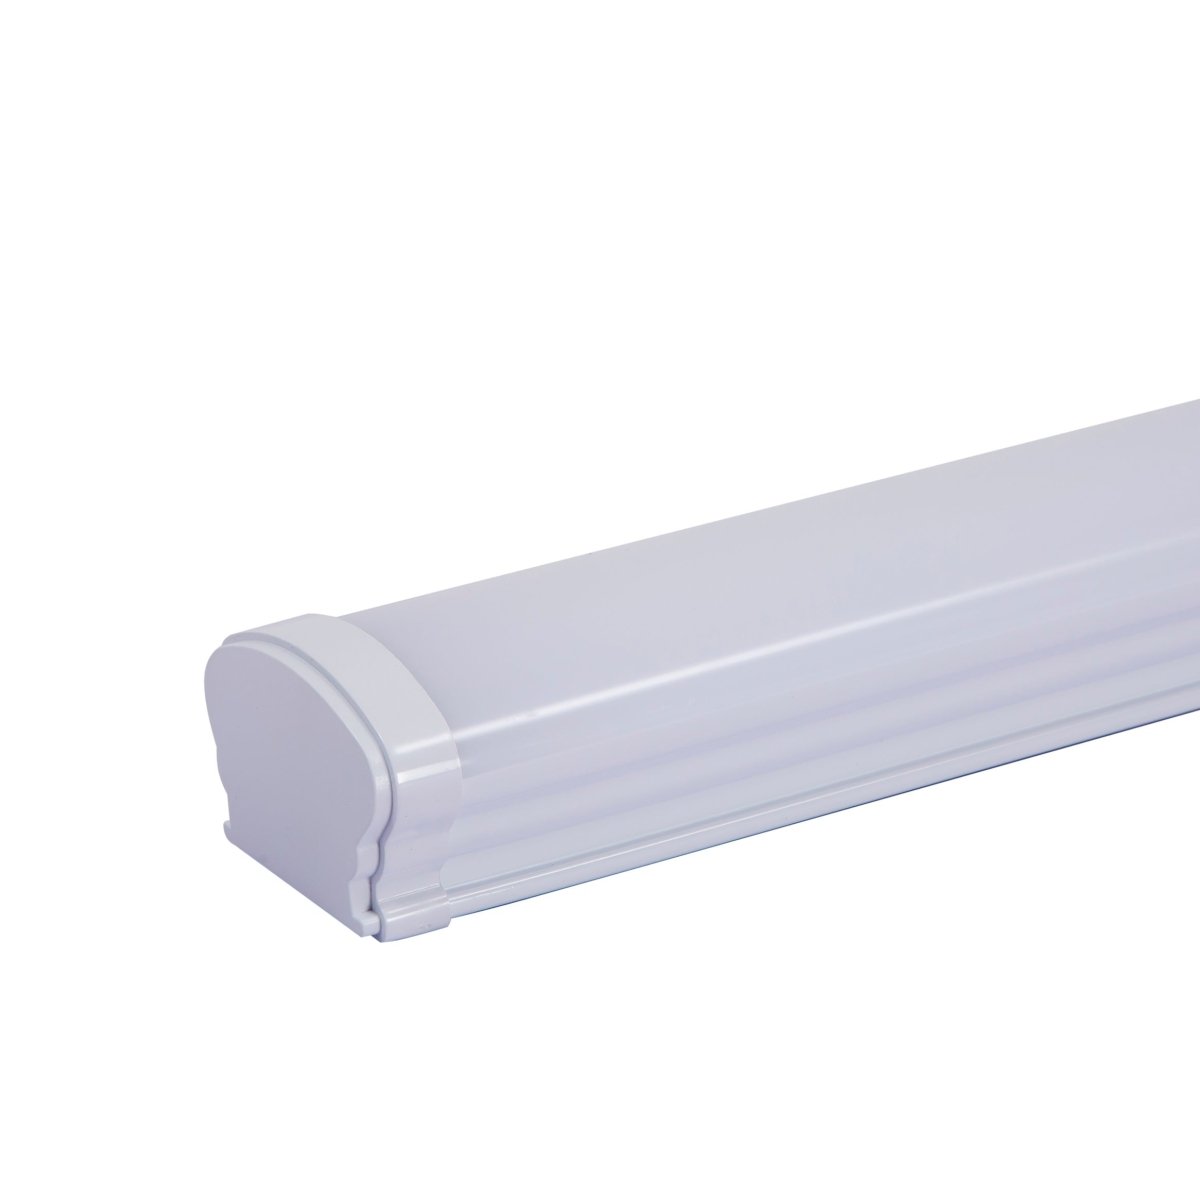 Main image of LED Tri-proof Batten Linear Fitting 24W 6500K Cool Daylight IP65 60cm 2ft